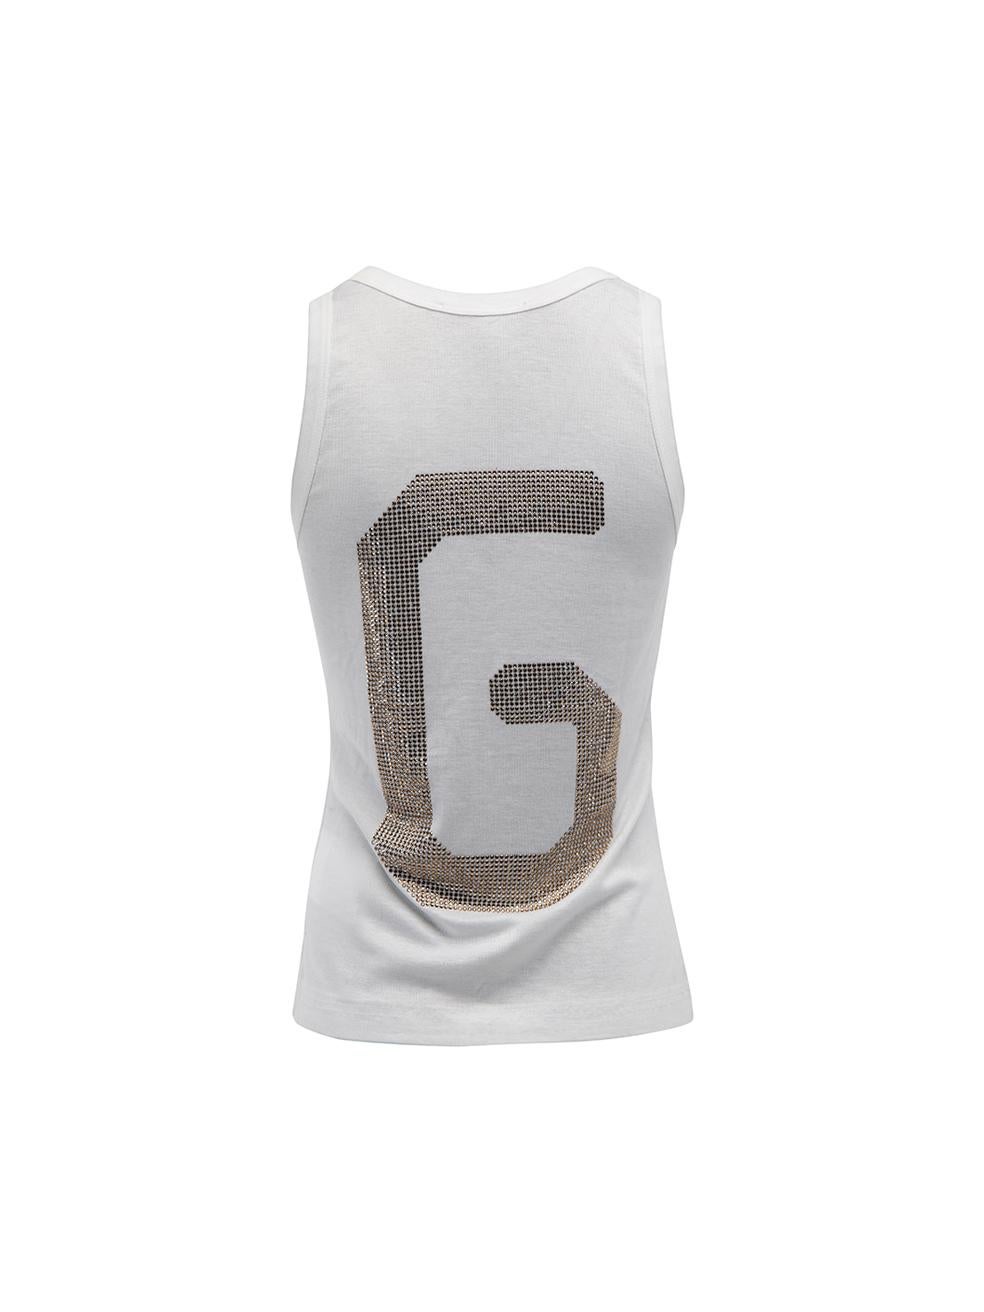 Pre-Loved Dolce & Gabbana Women's White Initial Crystal Tank Top In Excellent Condition In London, GB